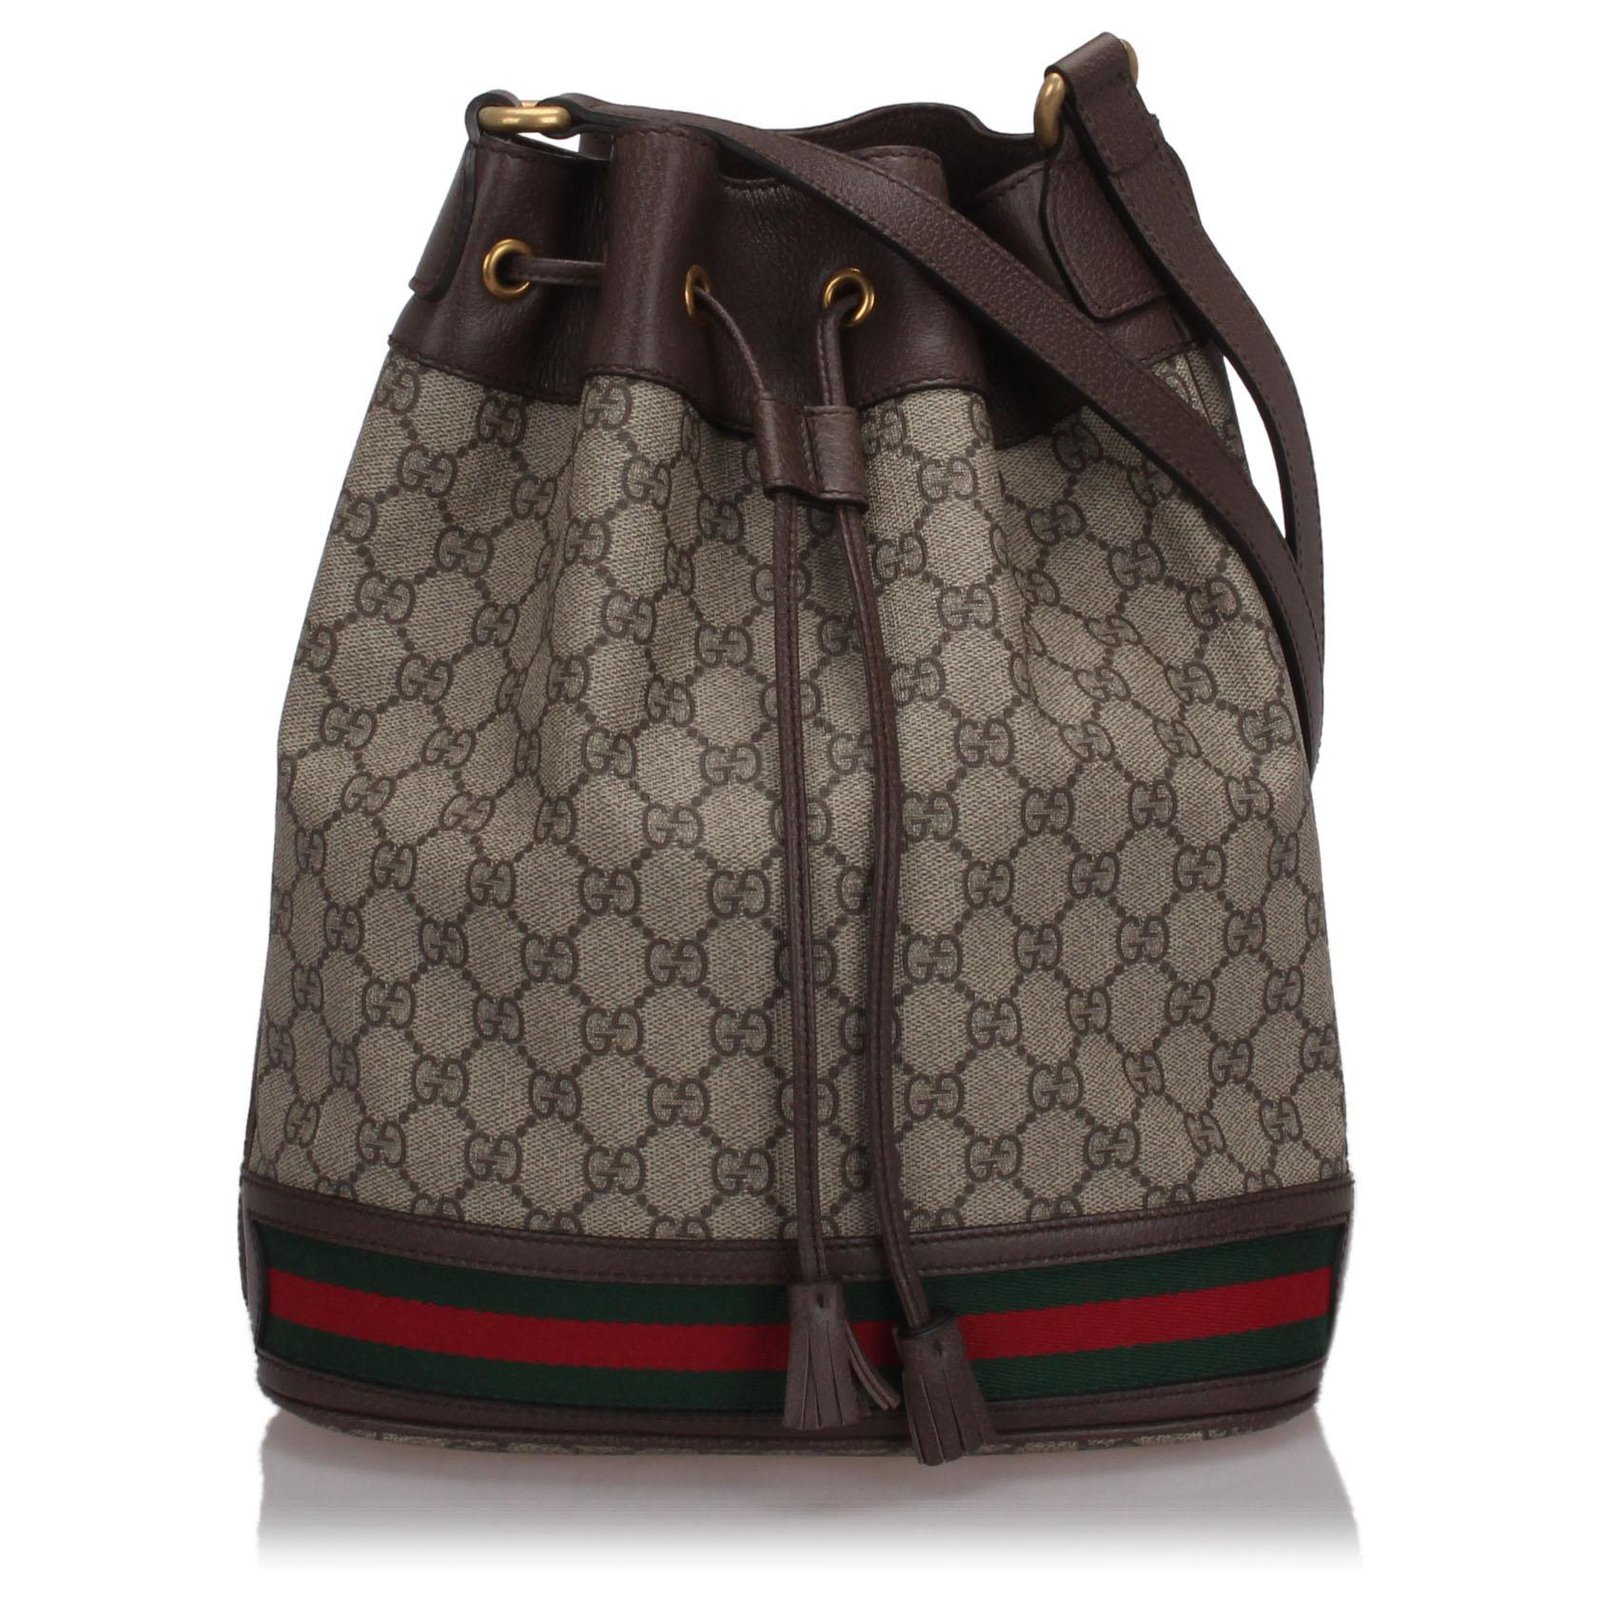 Gucci Ophidia Bucket Bag GG Coated Canvas Small Brown